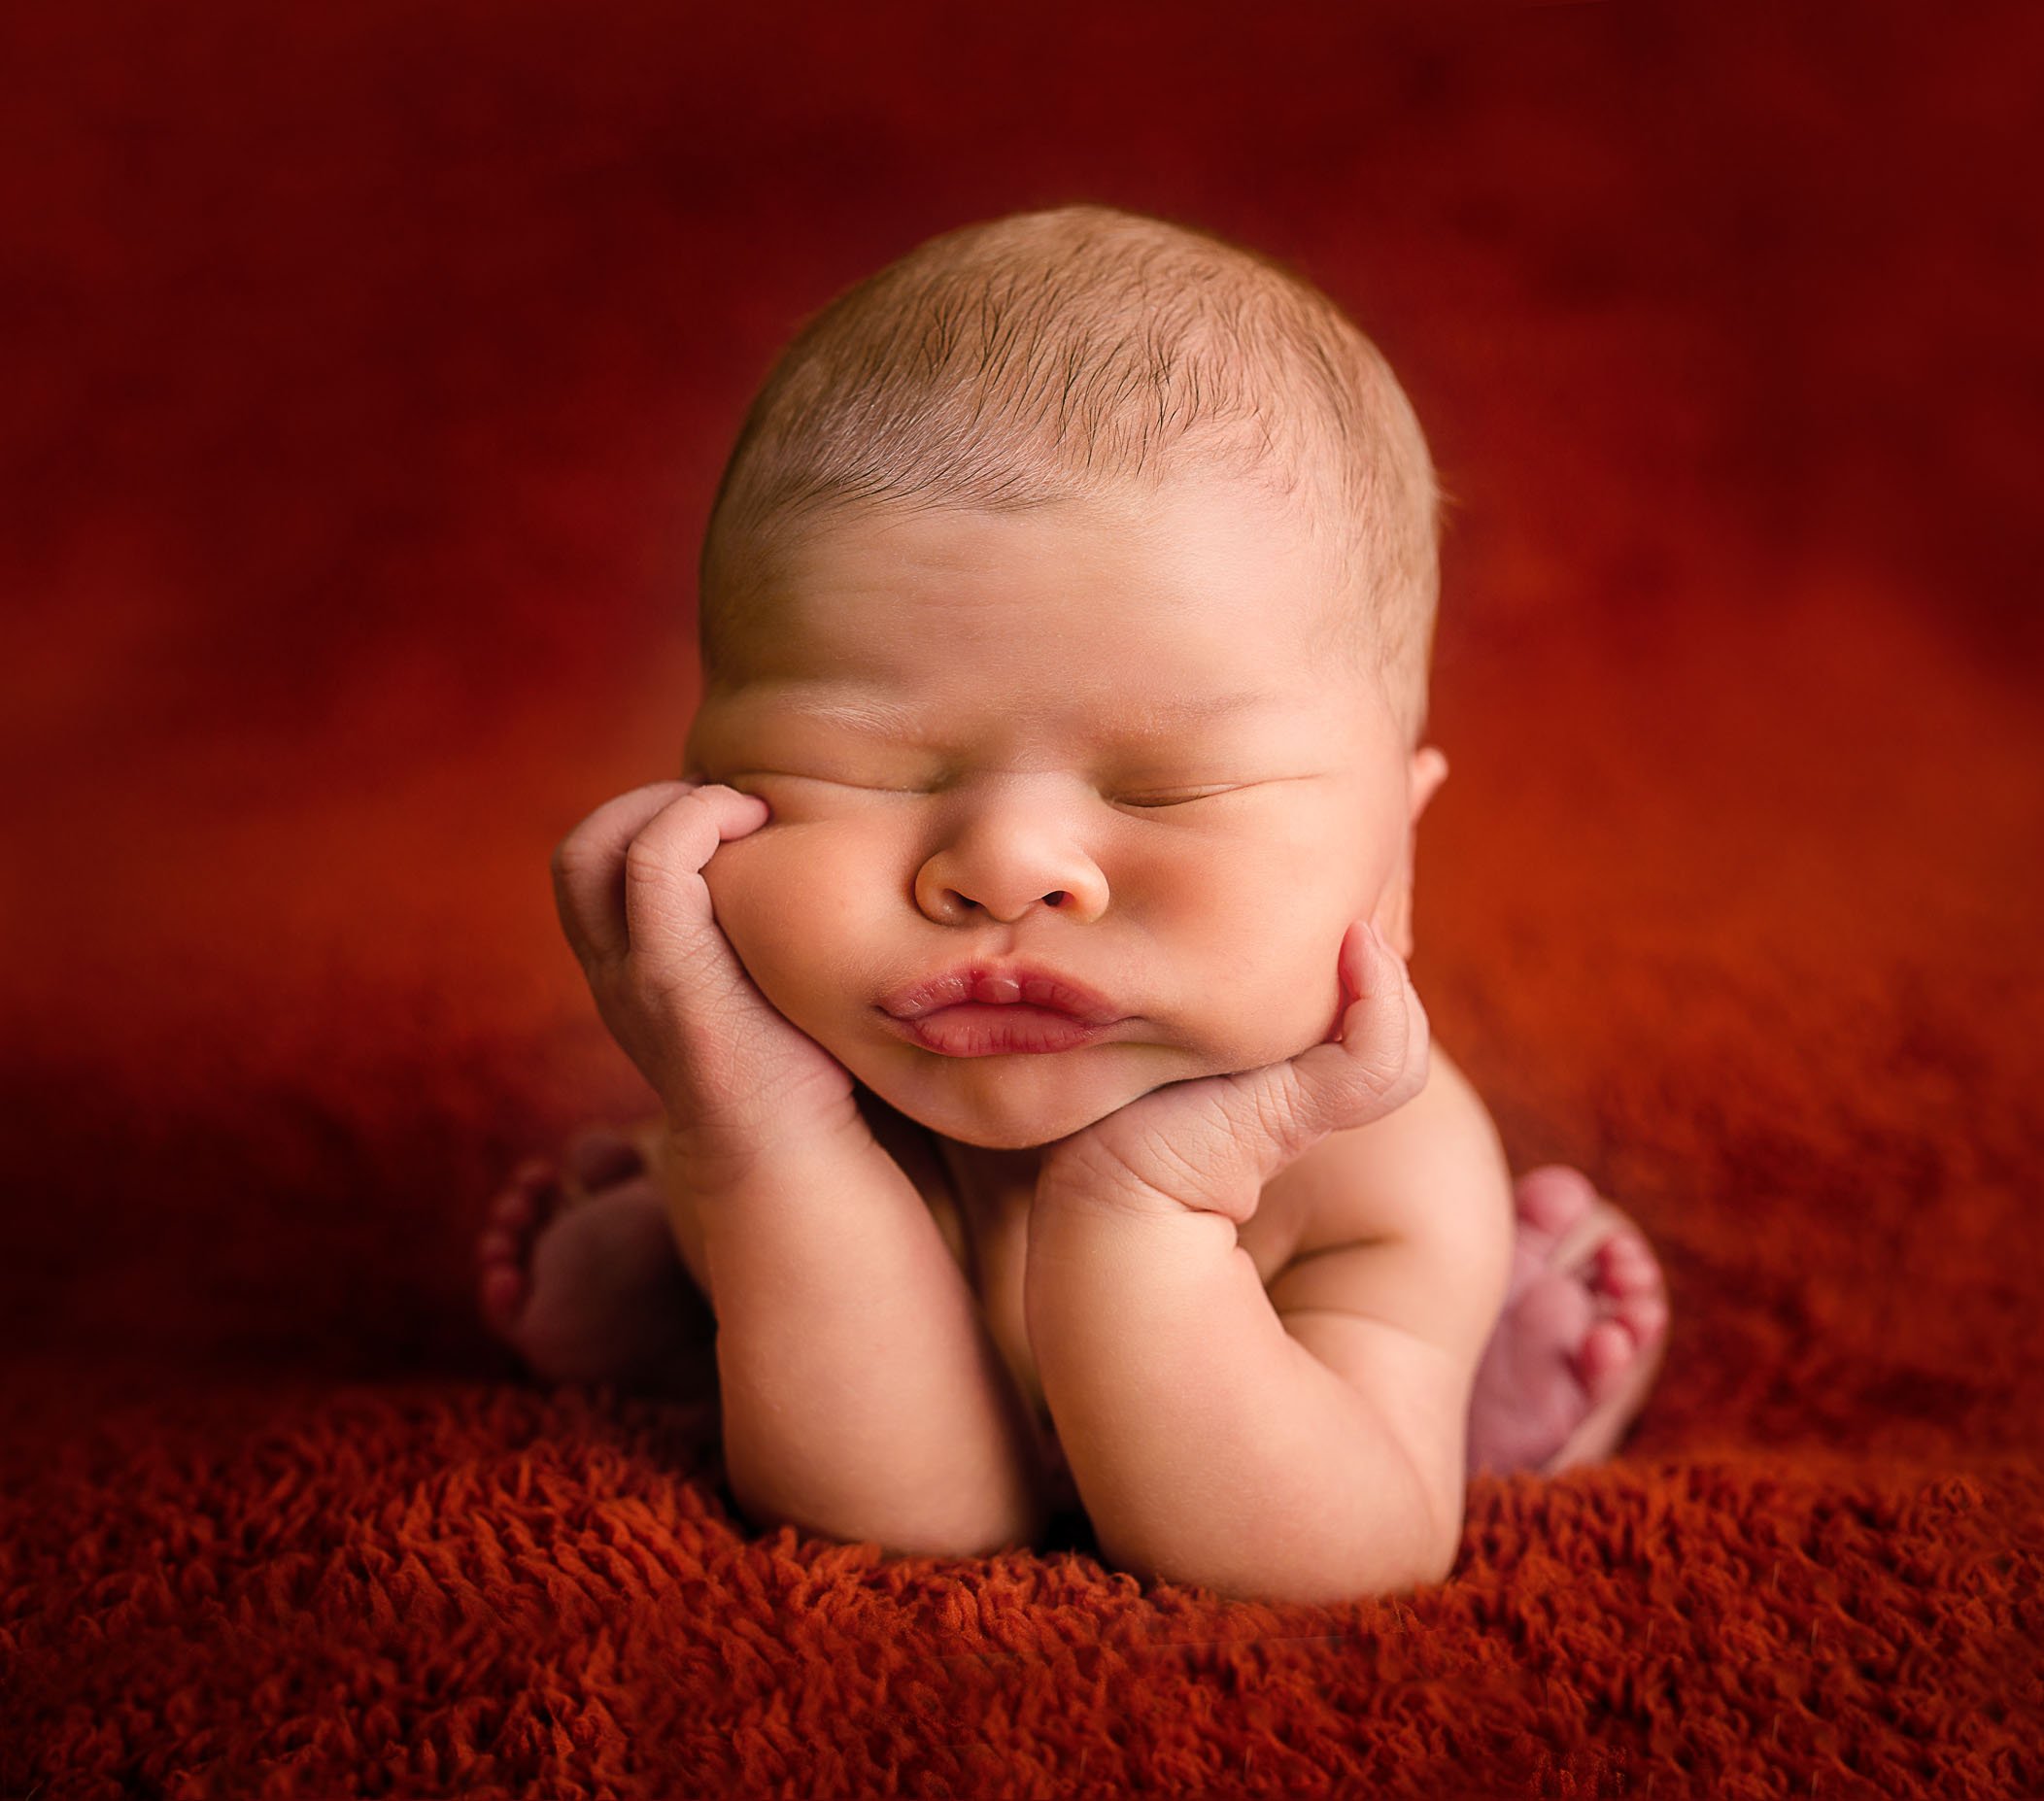 newborn baby in froggy pose with pouty lips on red background